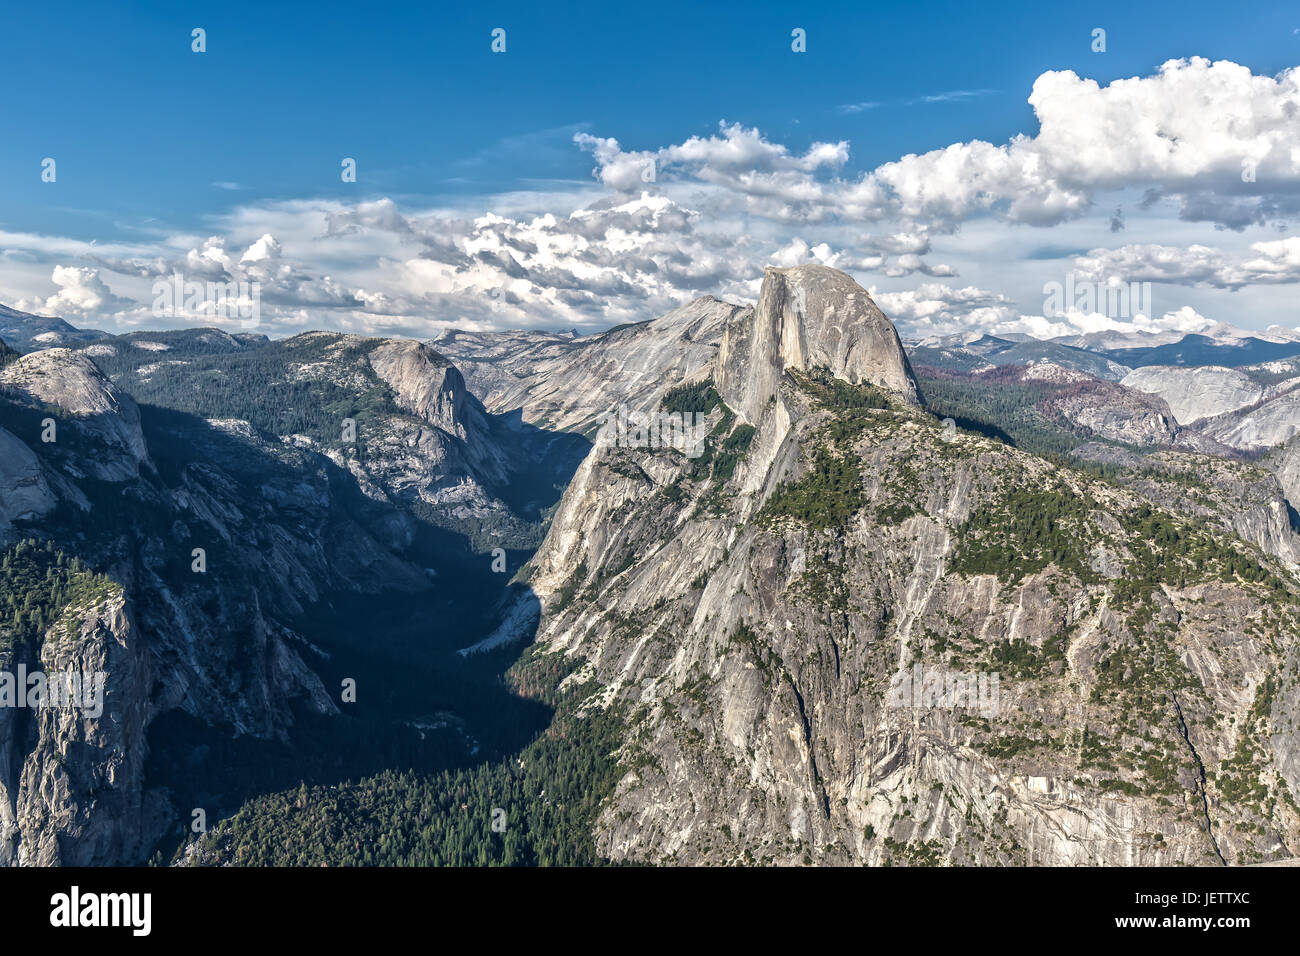 View from Glacier Point over Half Dome and Yosemite Valley Stock Photo